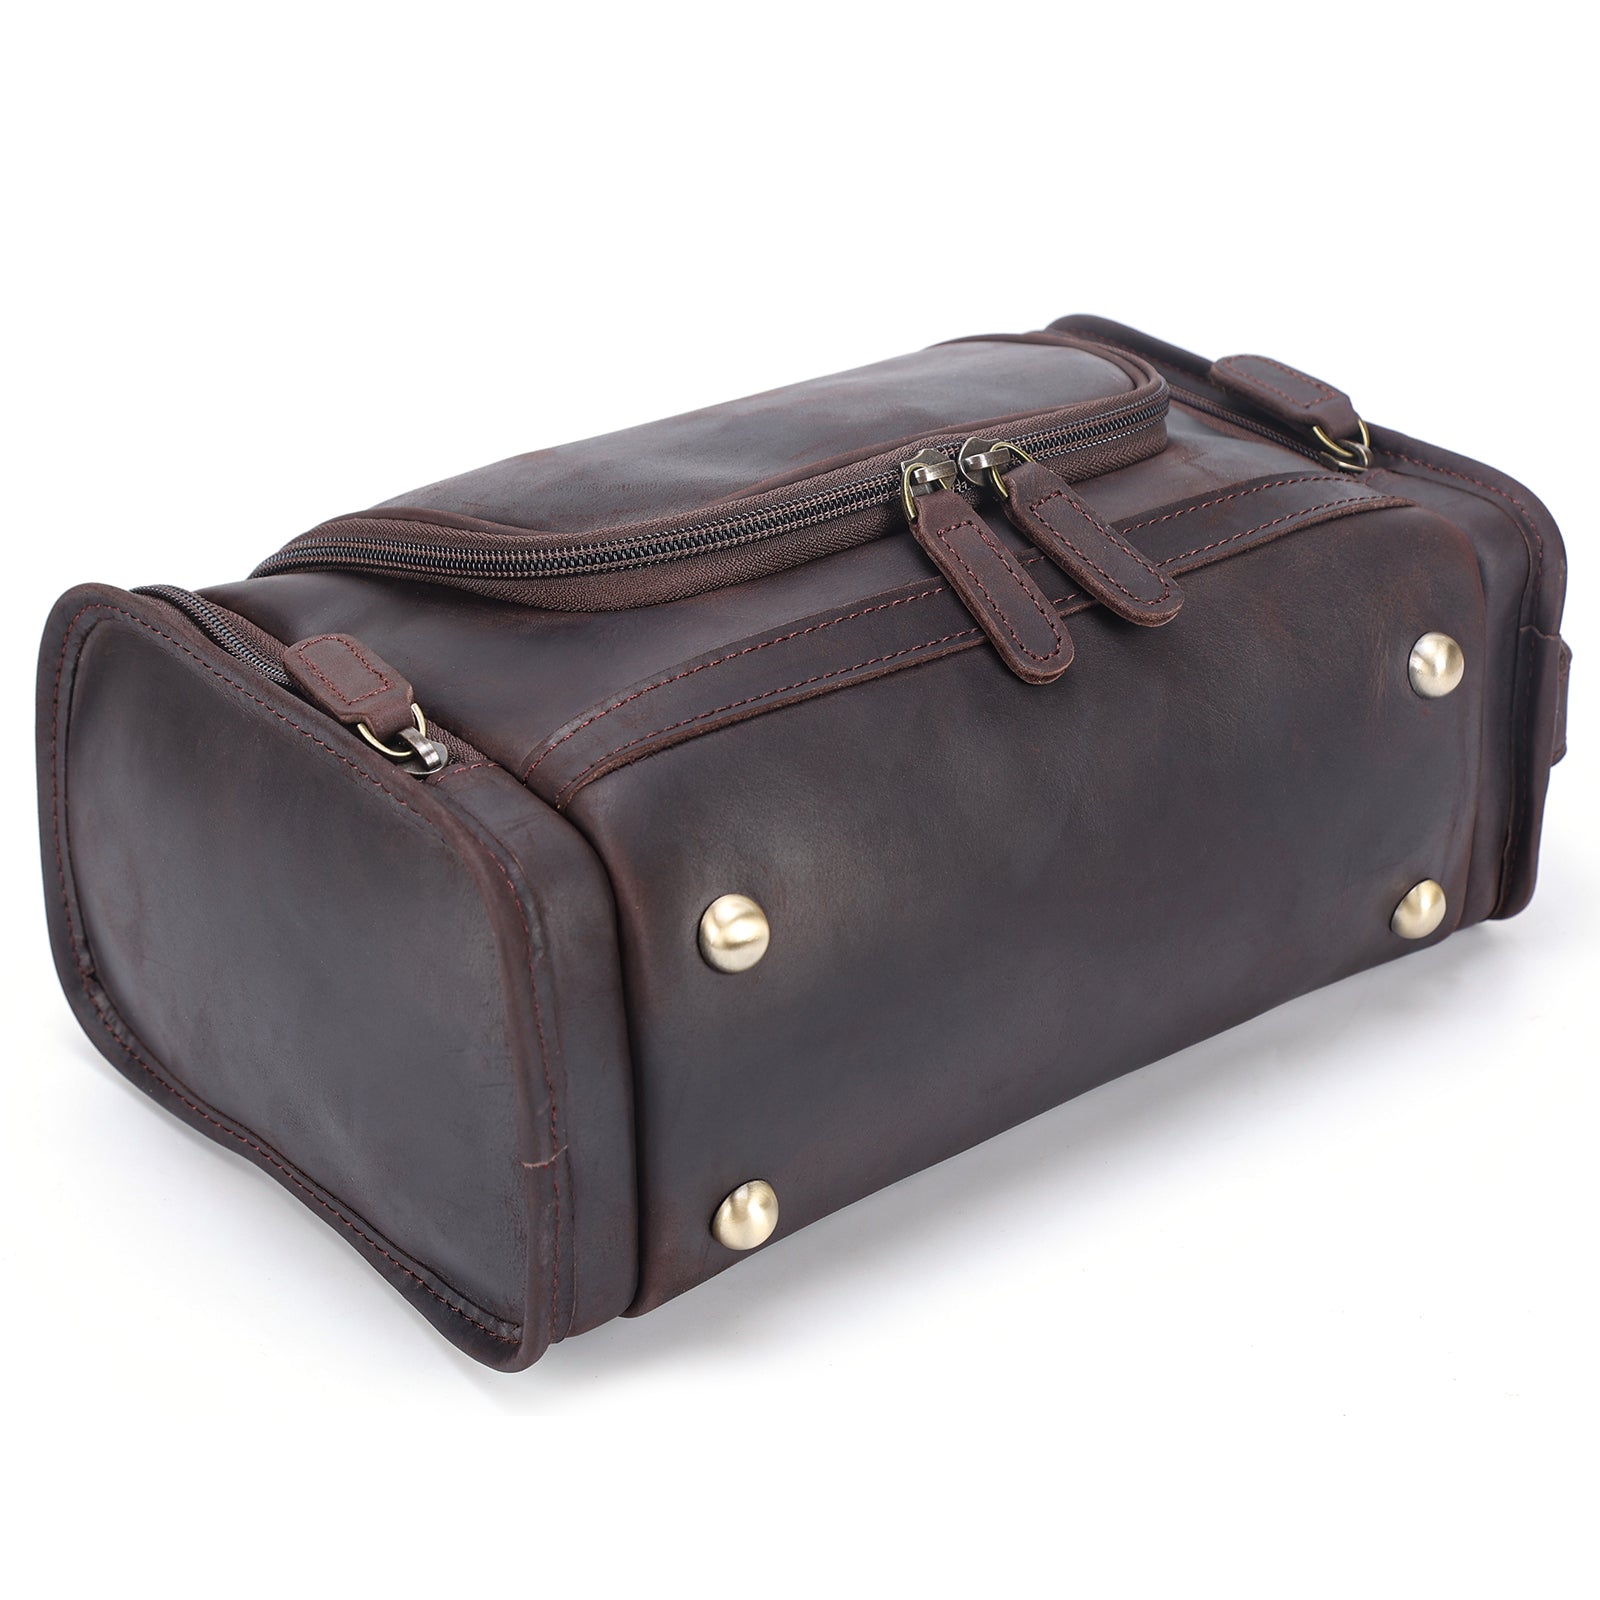 Full Grain Leather Toiletry Dopp Kit Cosmetic Bag with Hanging Hook (Bottom)